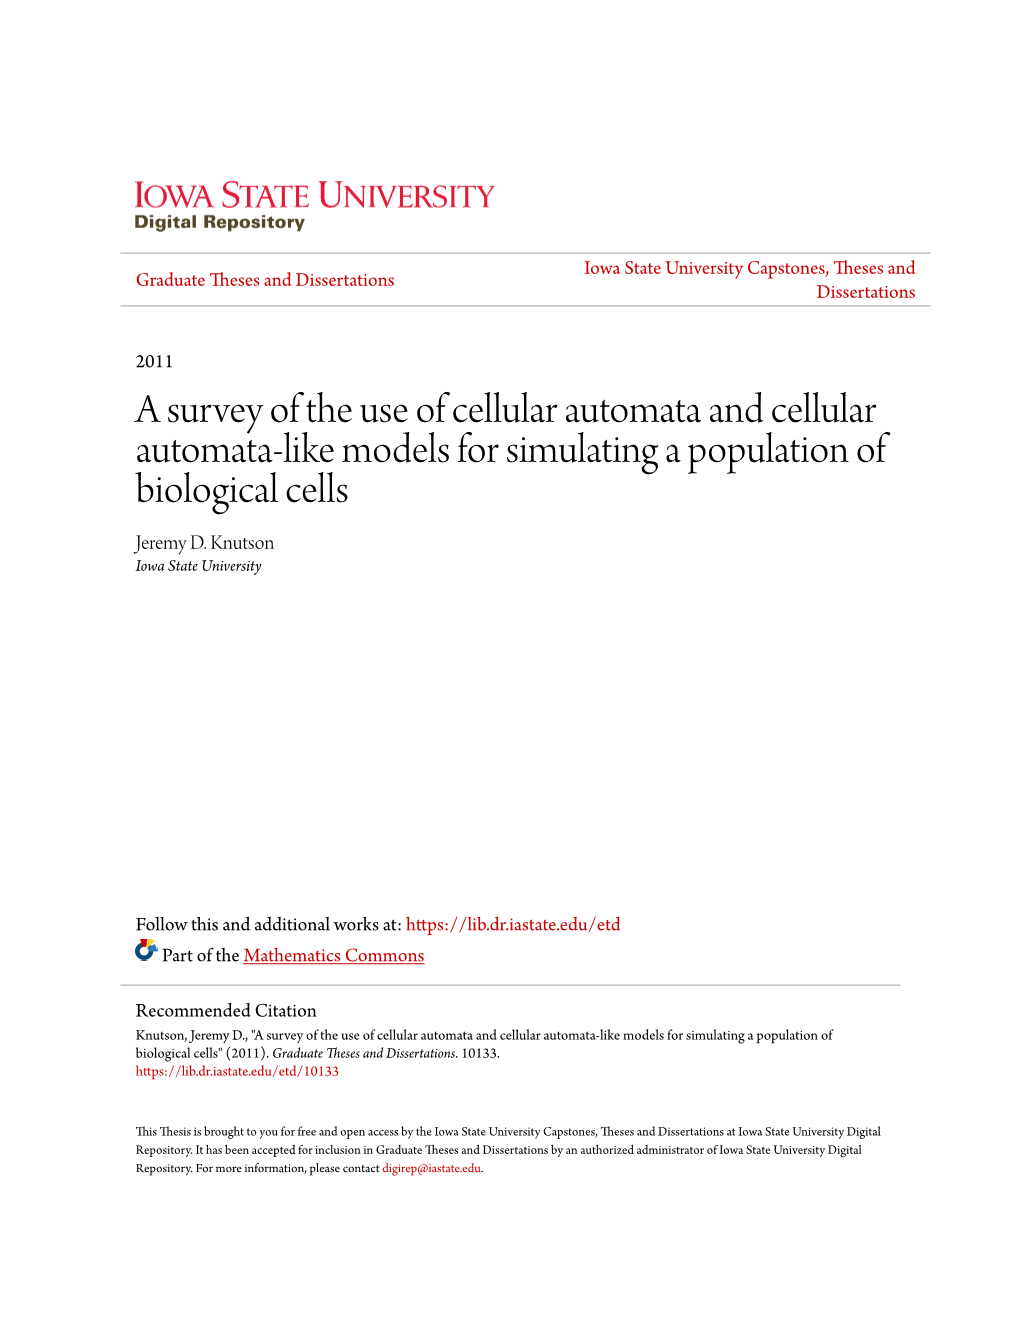 A Survey of the Use of Cellular Automata and Cellular Automata-Like Models for Simulating a Population of Biological Cells Jeremy D